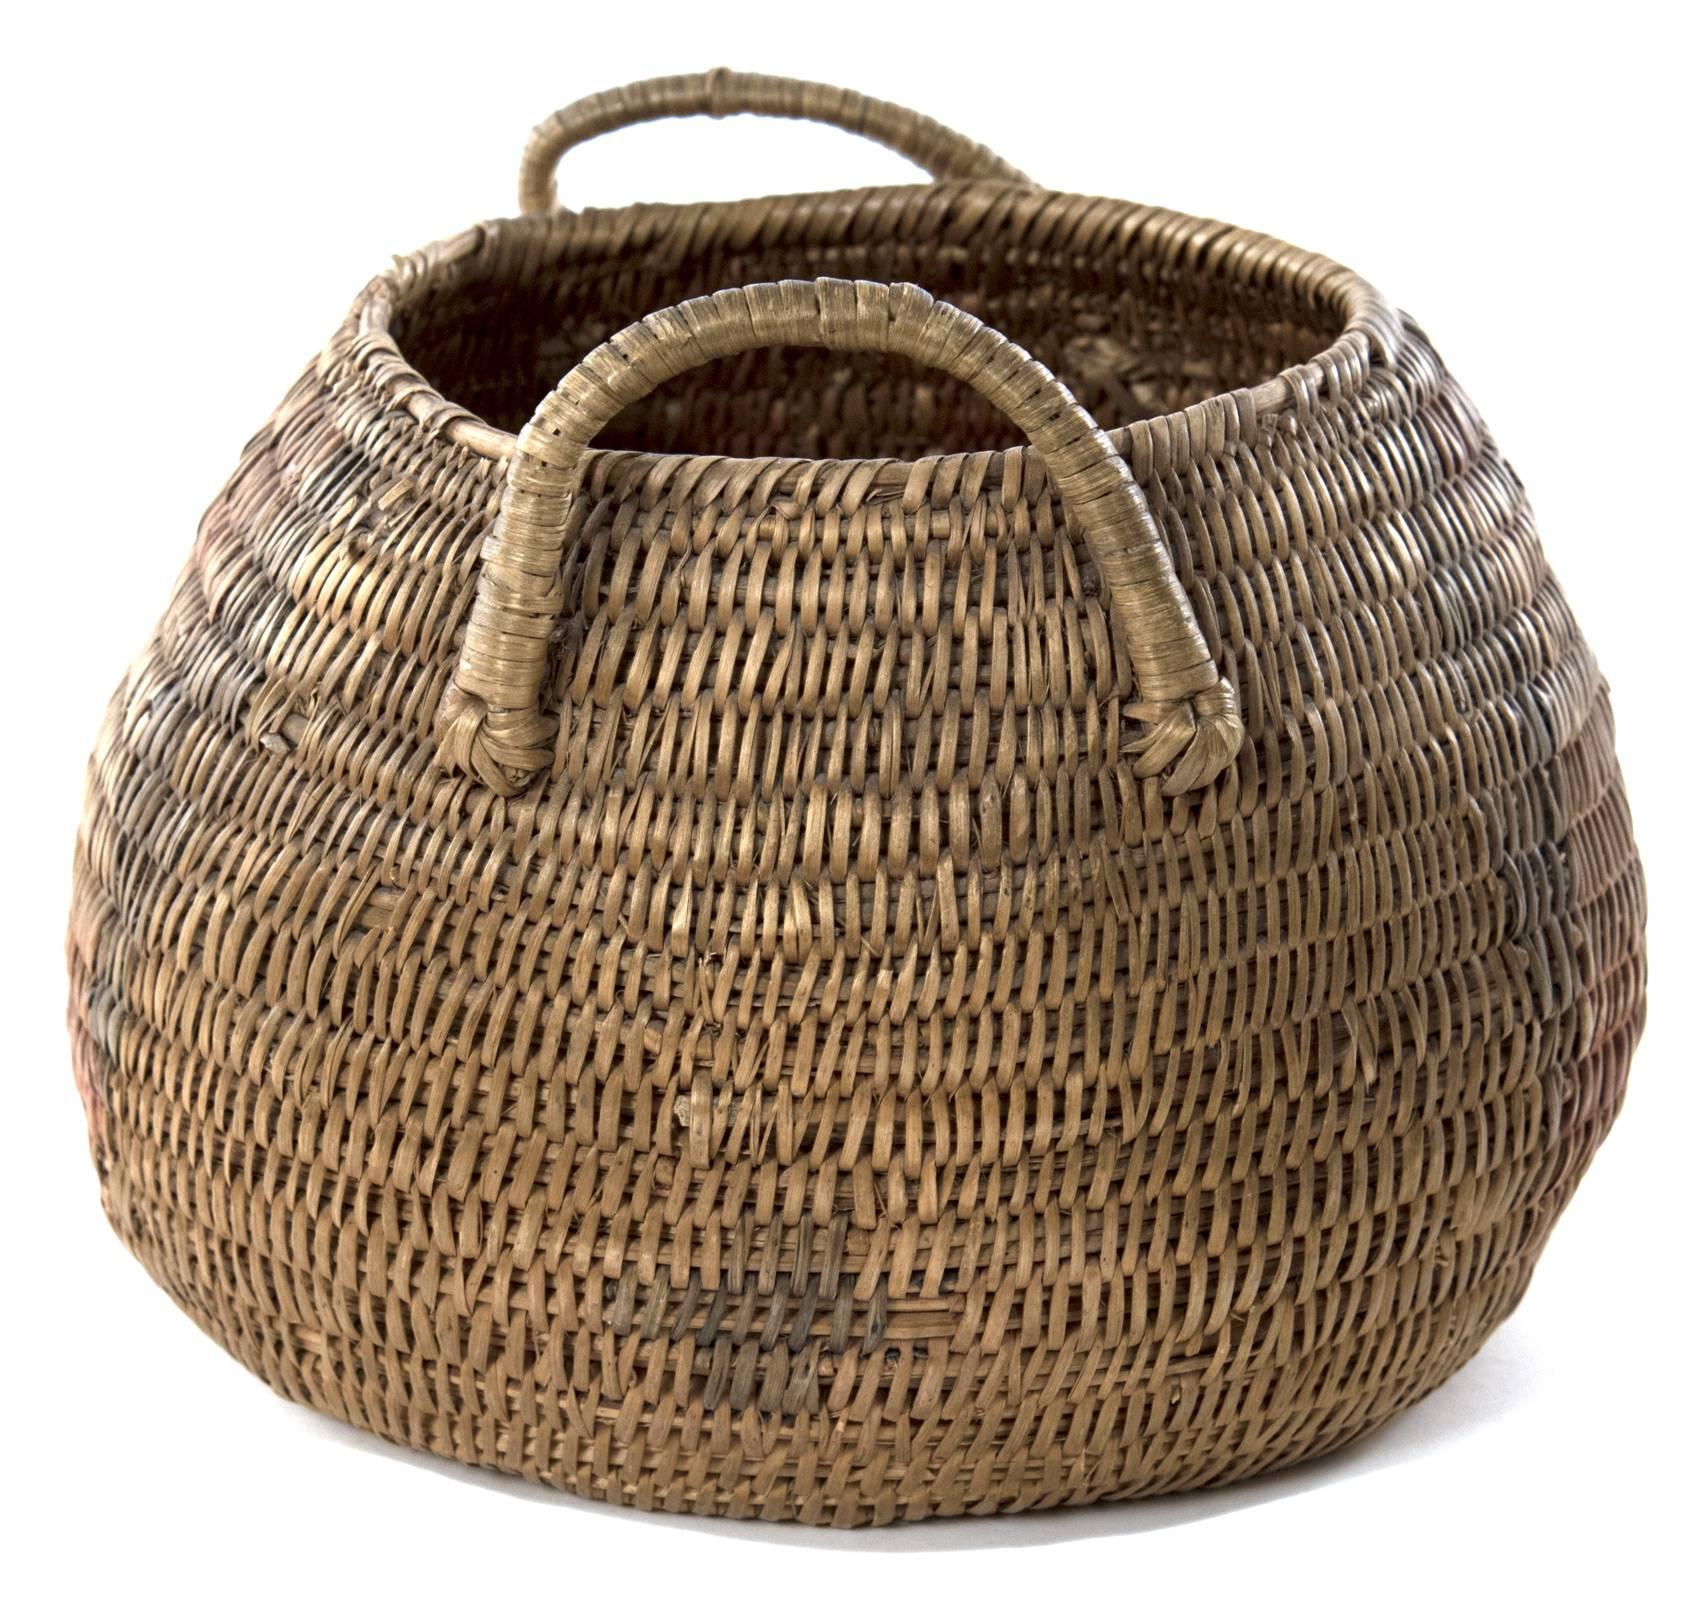 A Native American basket of squat and globular form, with a twined woven body decorated with black red designs and coiled handles raised from the shoulders.